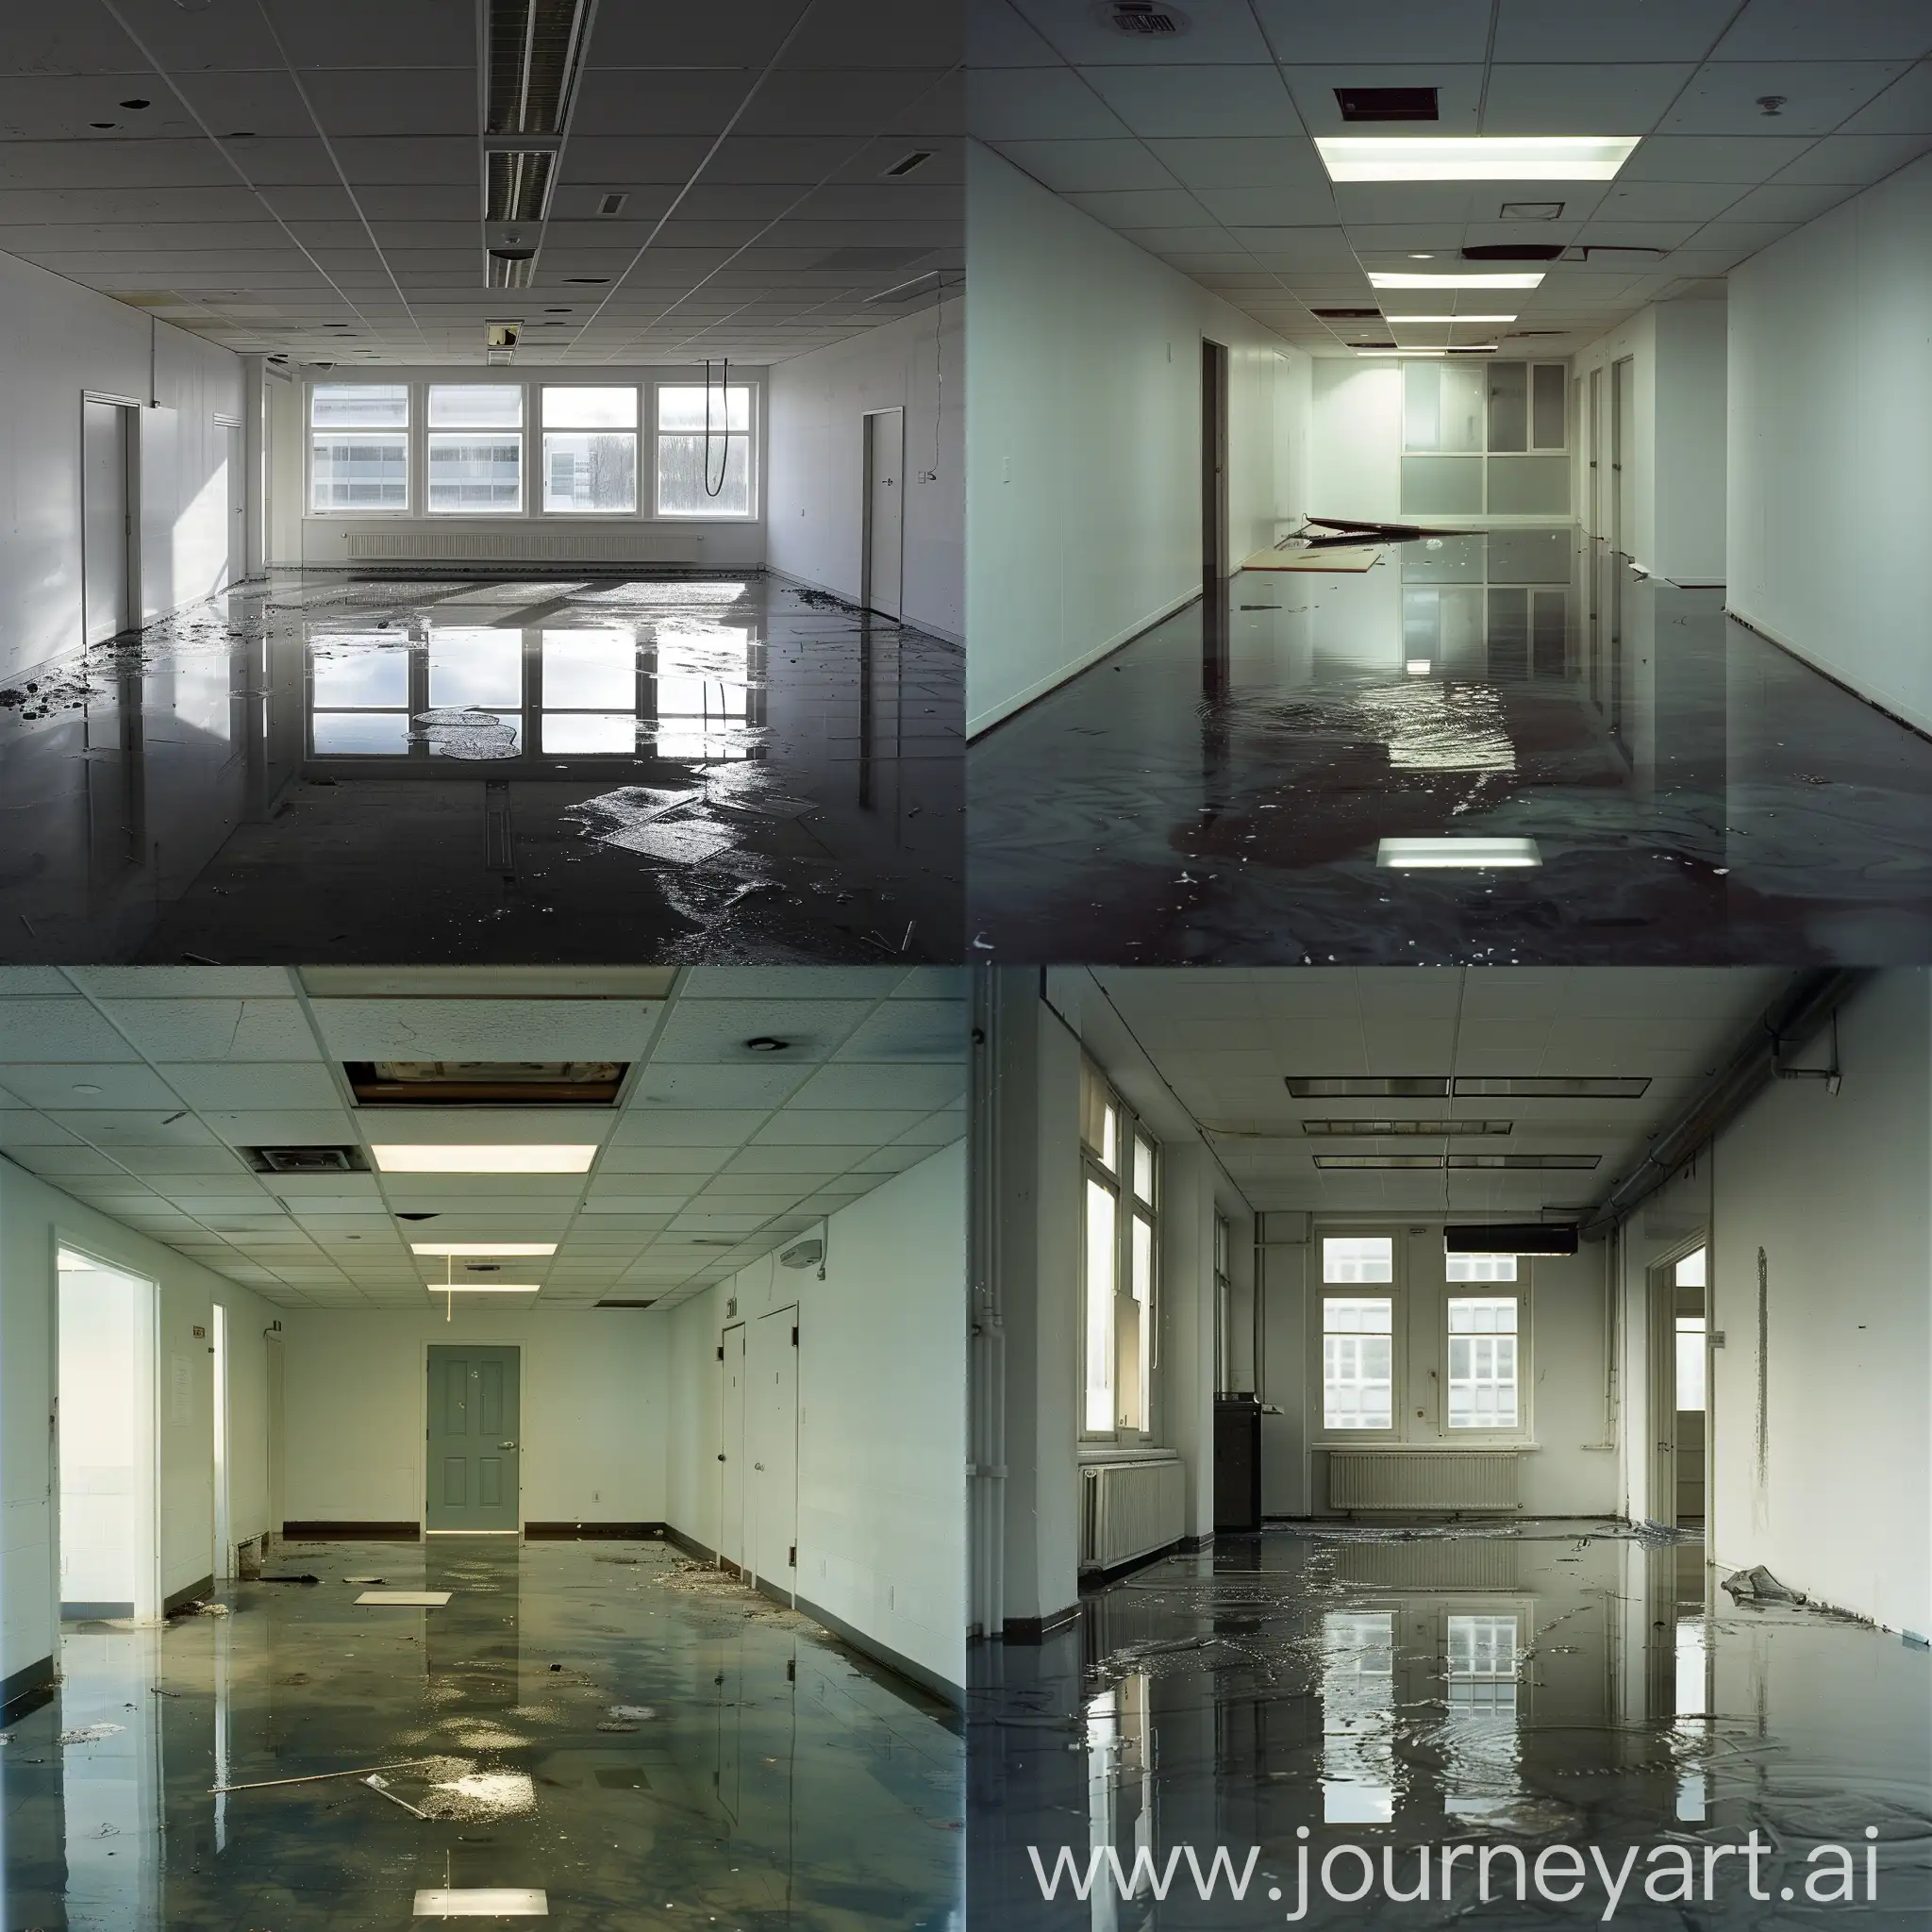 An empty office room that is a bit flooded, liminal, backrooms, dreamcore